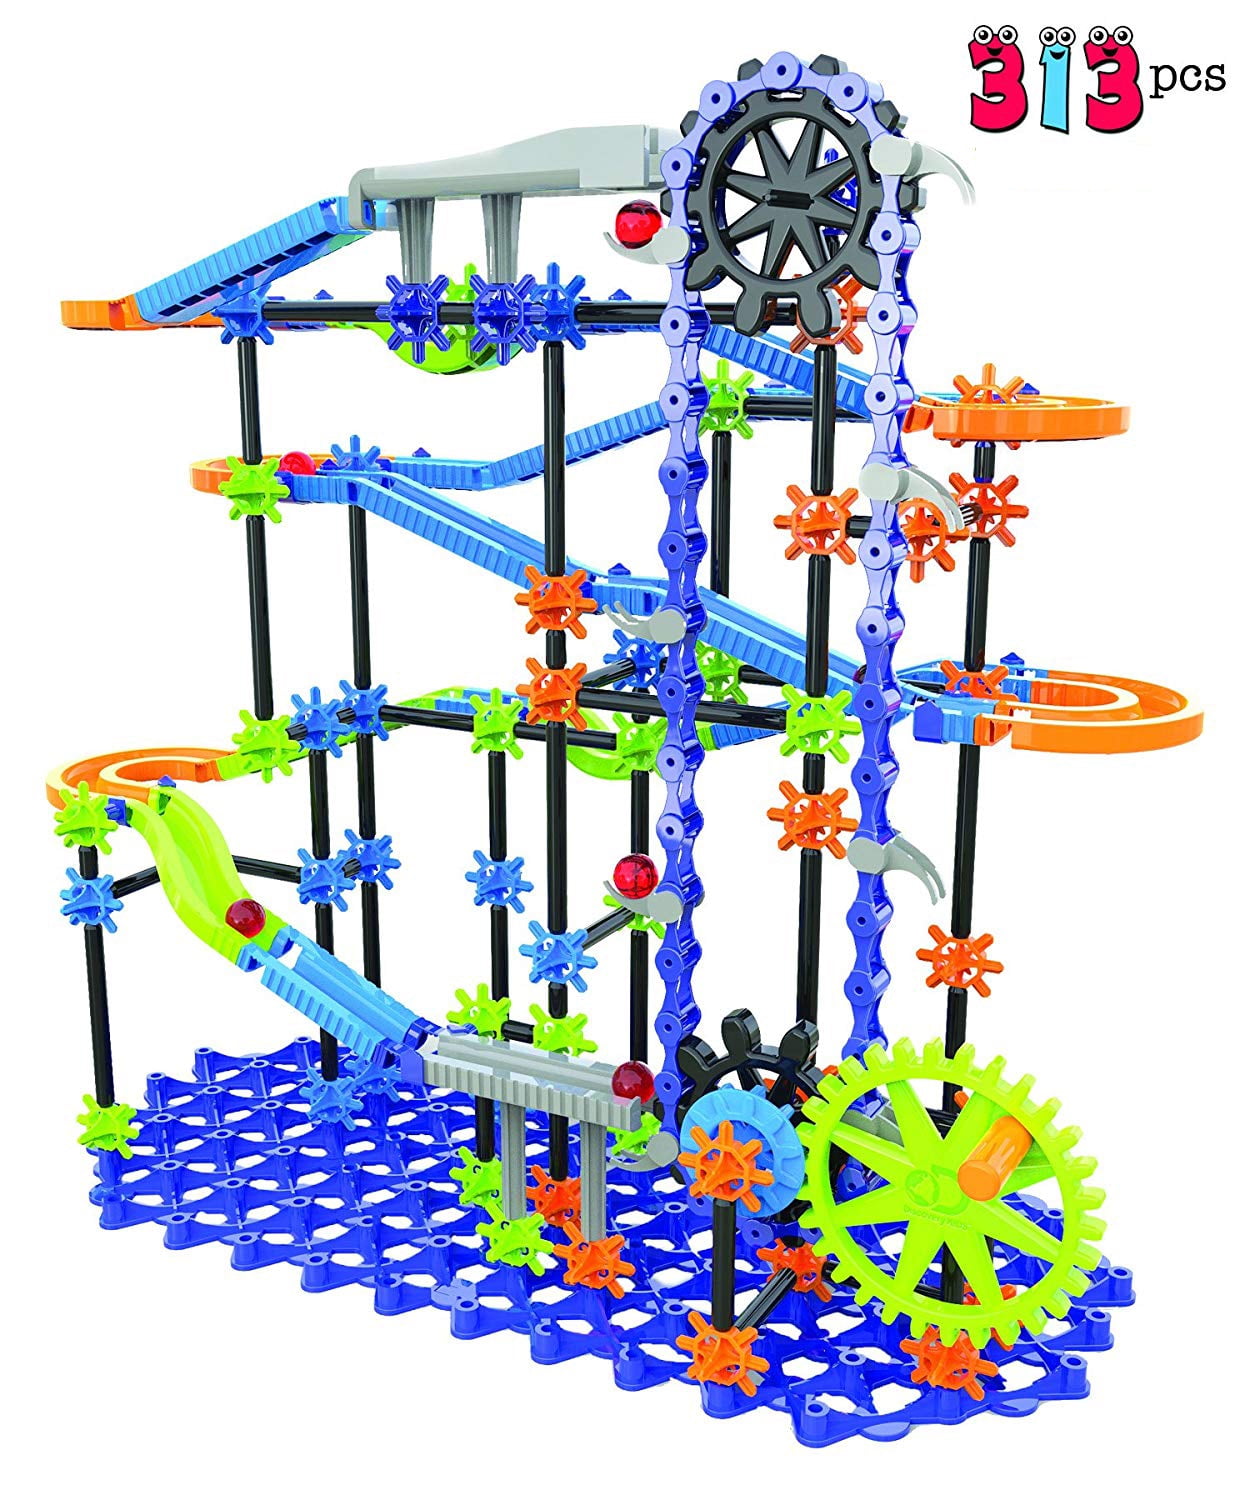 Discovery Kids Ultimate Marble Race Toy for Kids 313 Pieces | Stimulates Creativity, Imagination & Motor Skills, Sturdy Colorful Design, Endless Combinations for Science and Engineering